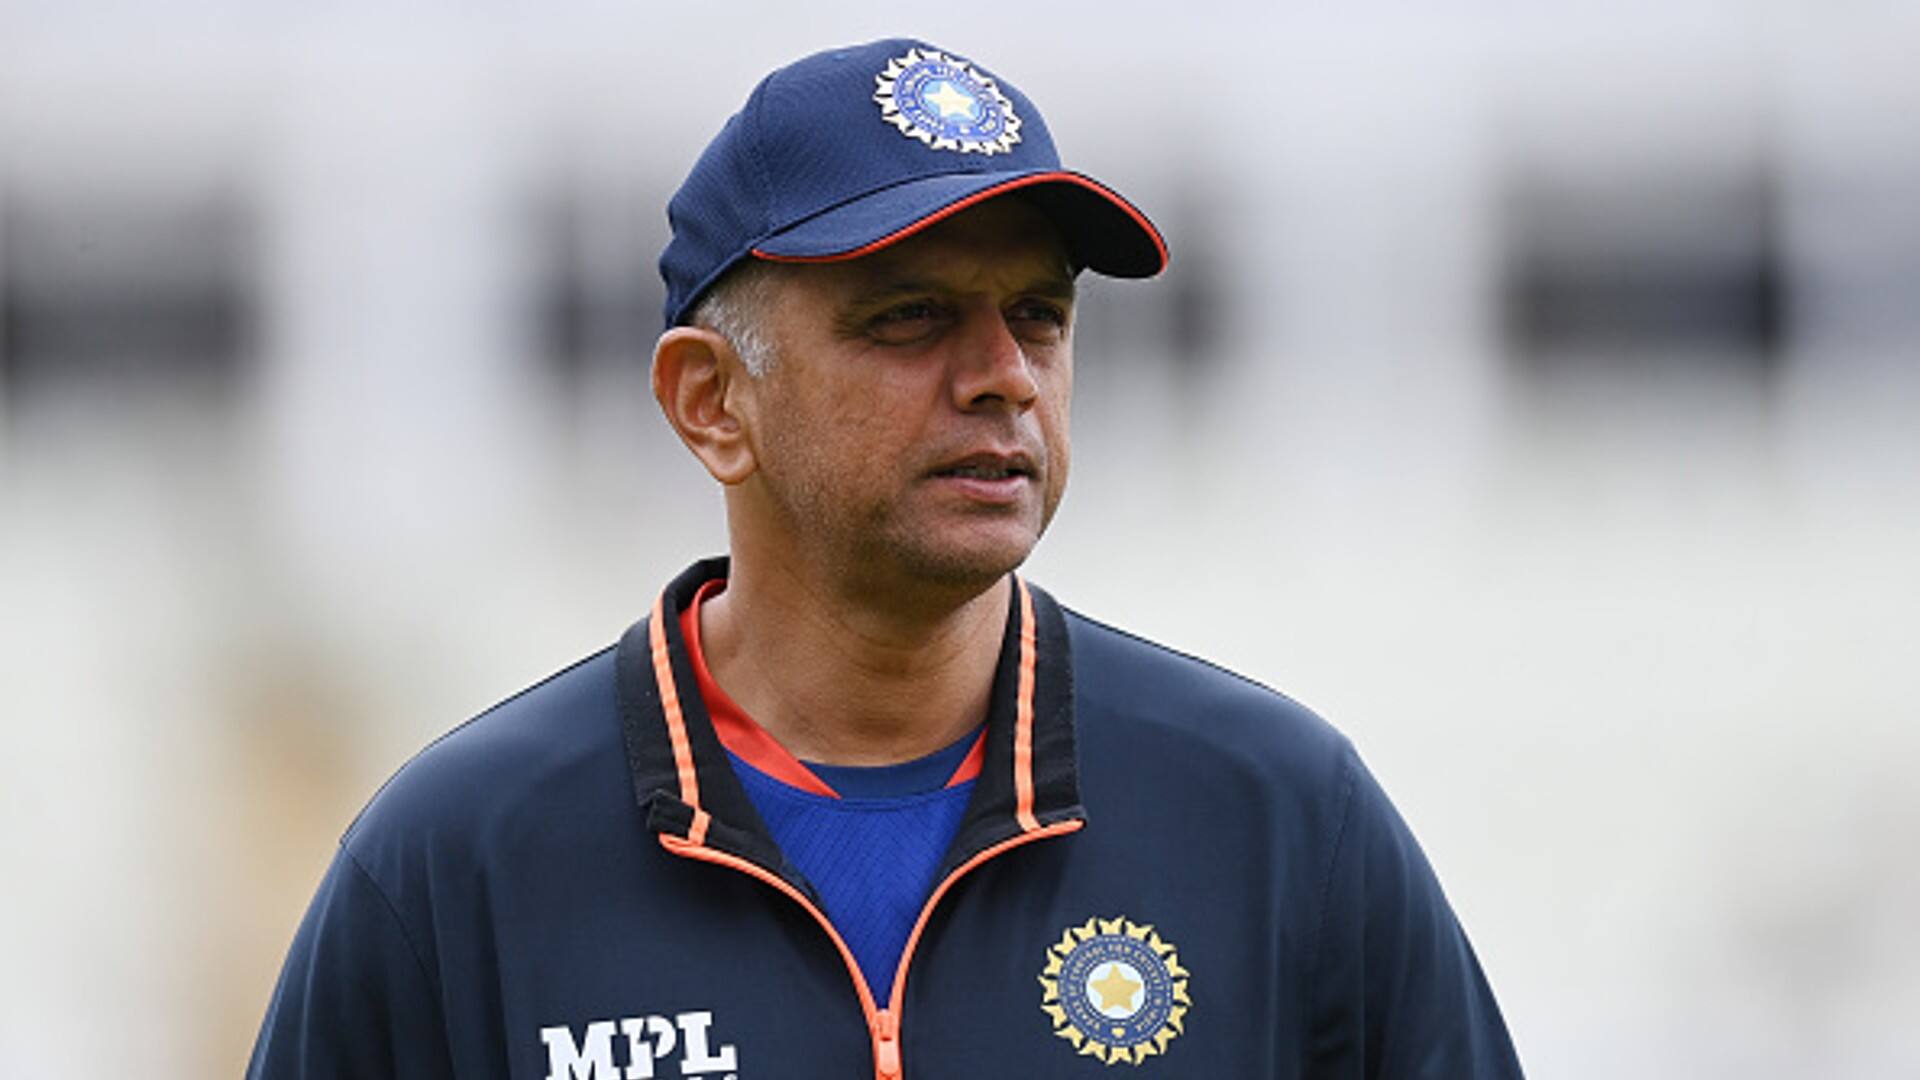 Asia Cup 2022: Rahul Dravid recovers from COVID-19 in time for India-Pakistan clash - Report